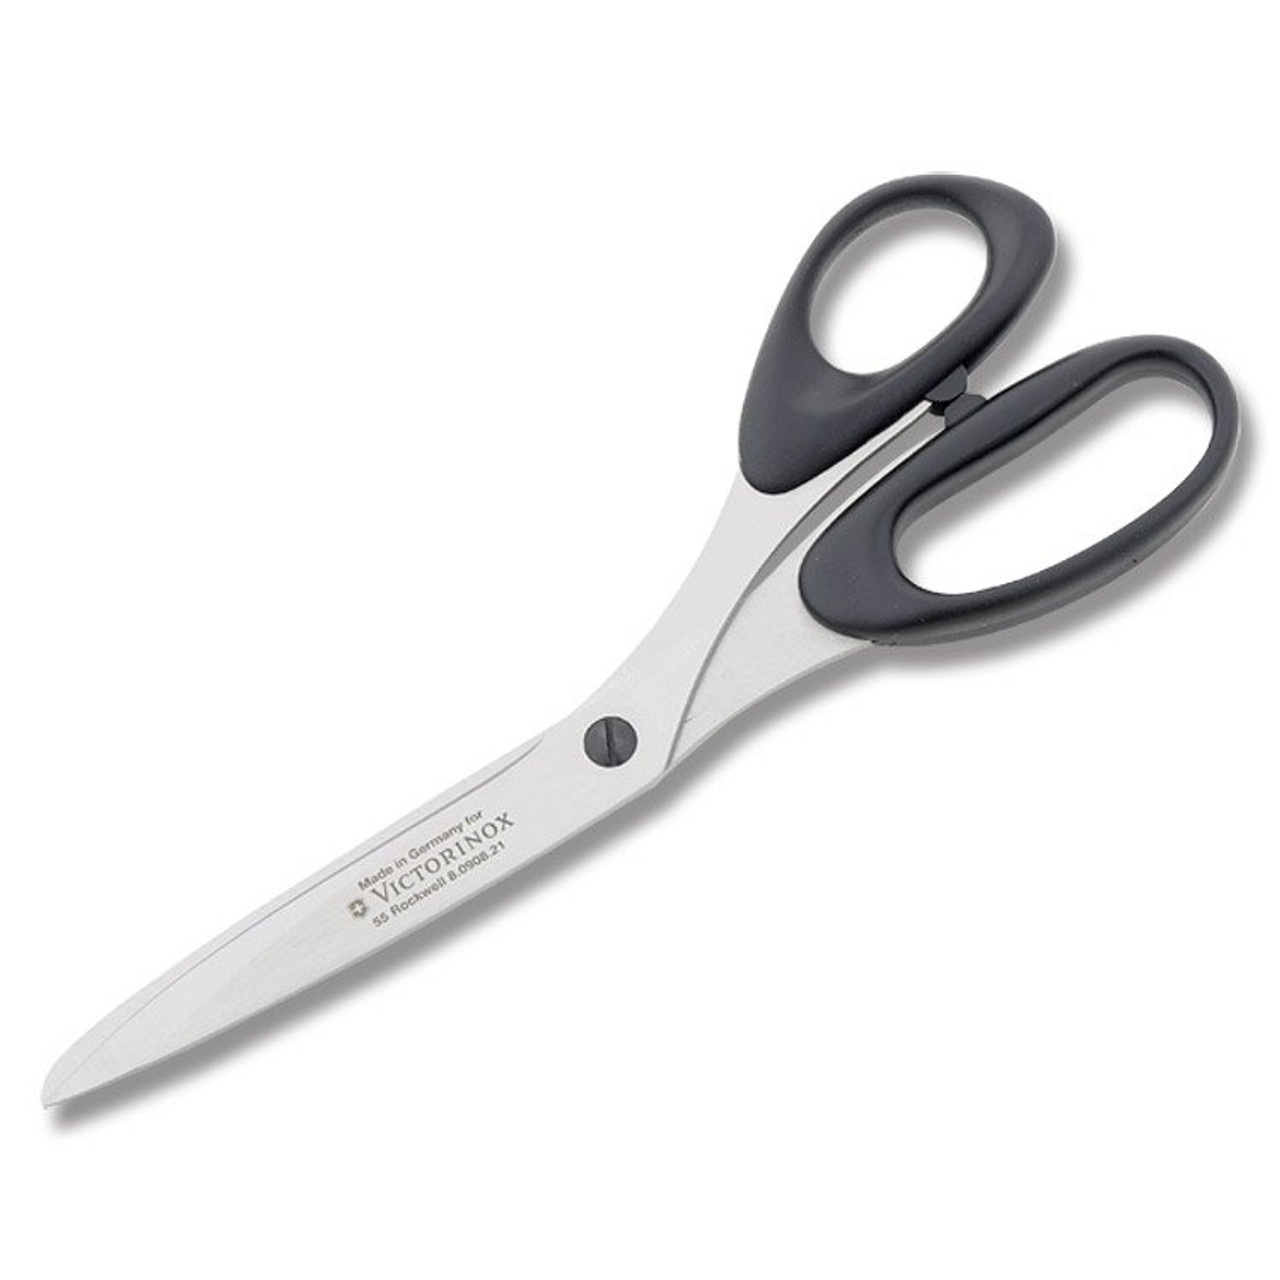 Replacement Stainless Steel Scissors for Victorinox Swiss Army